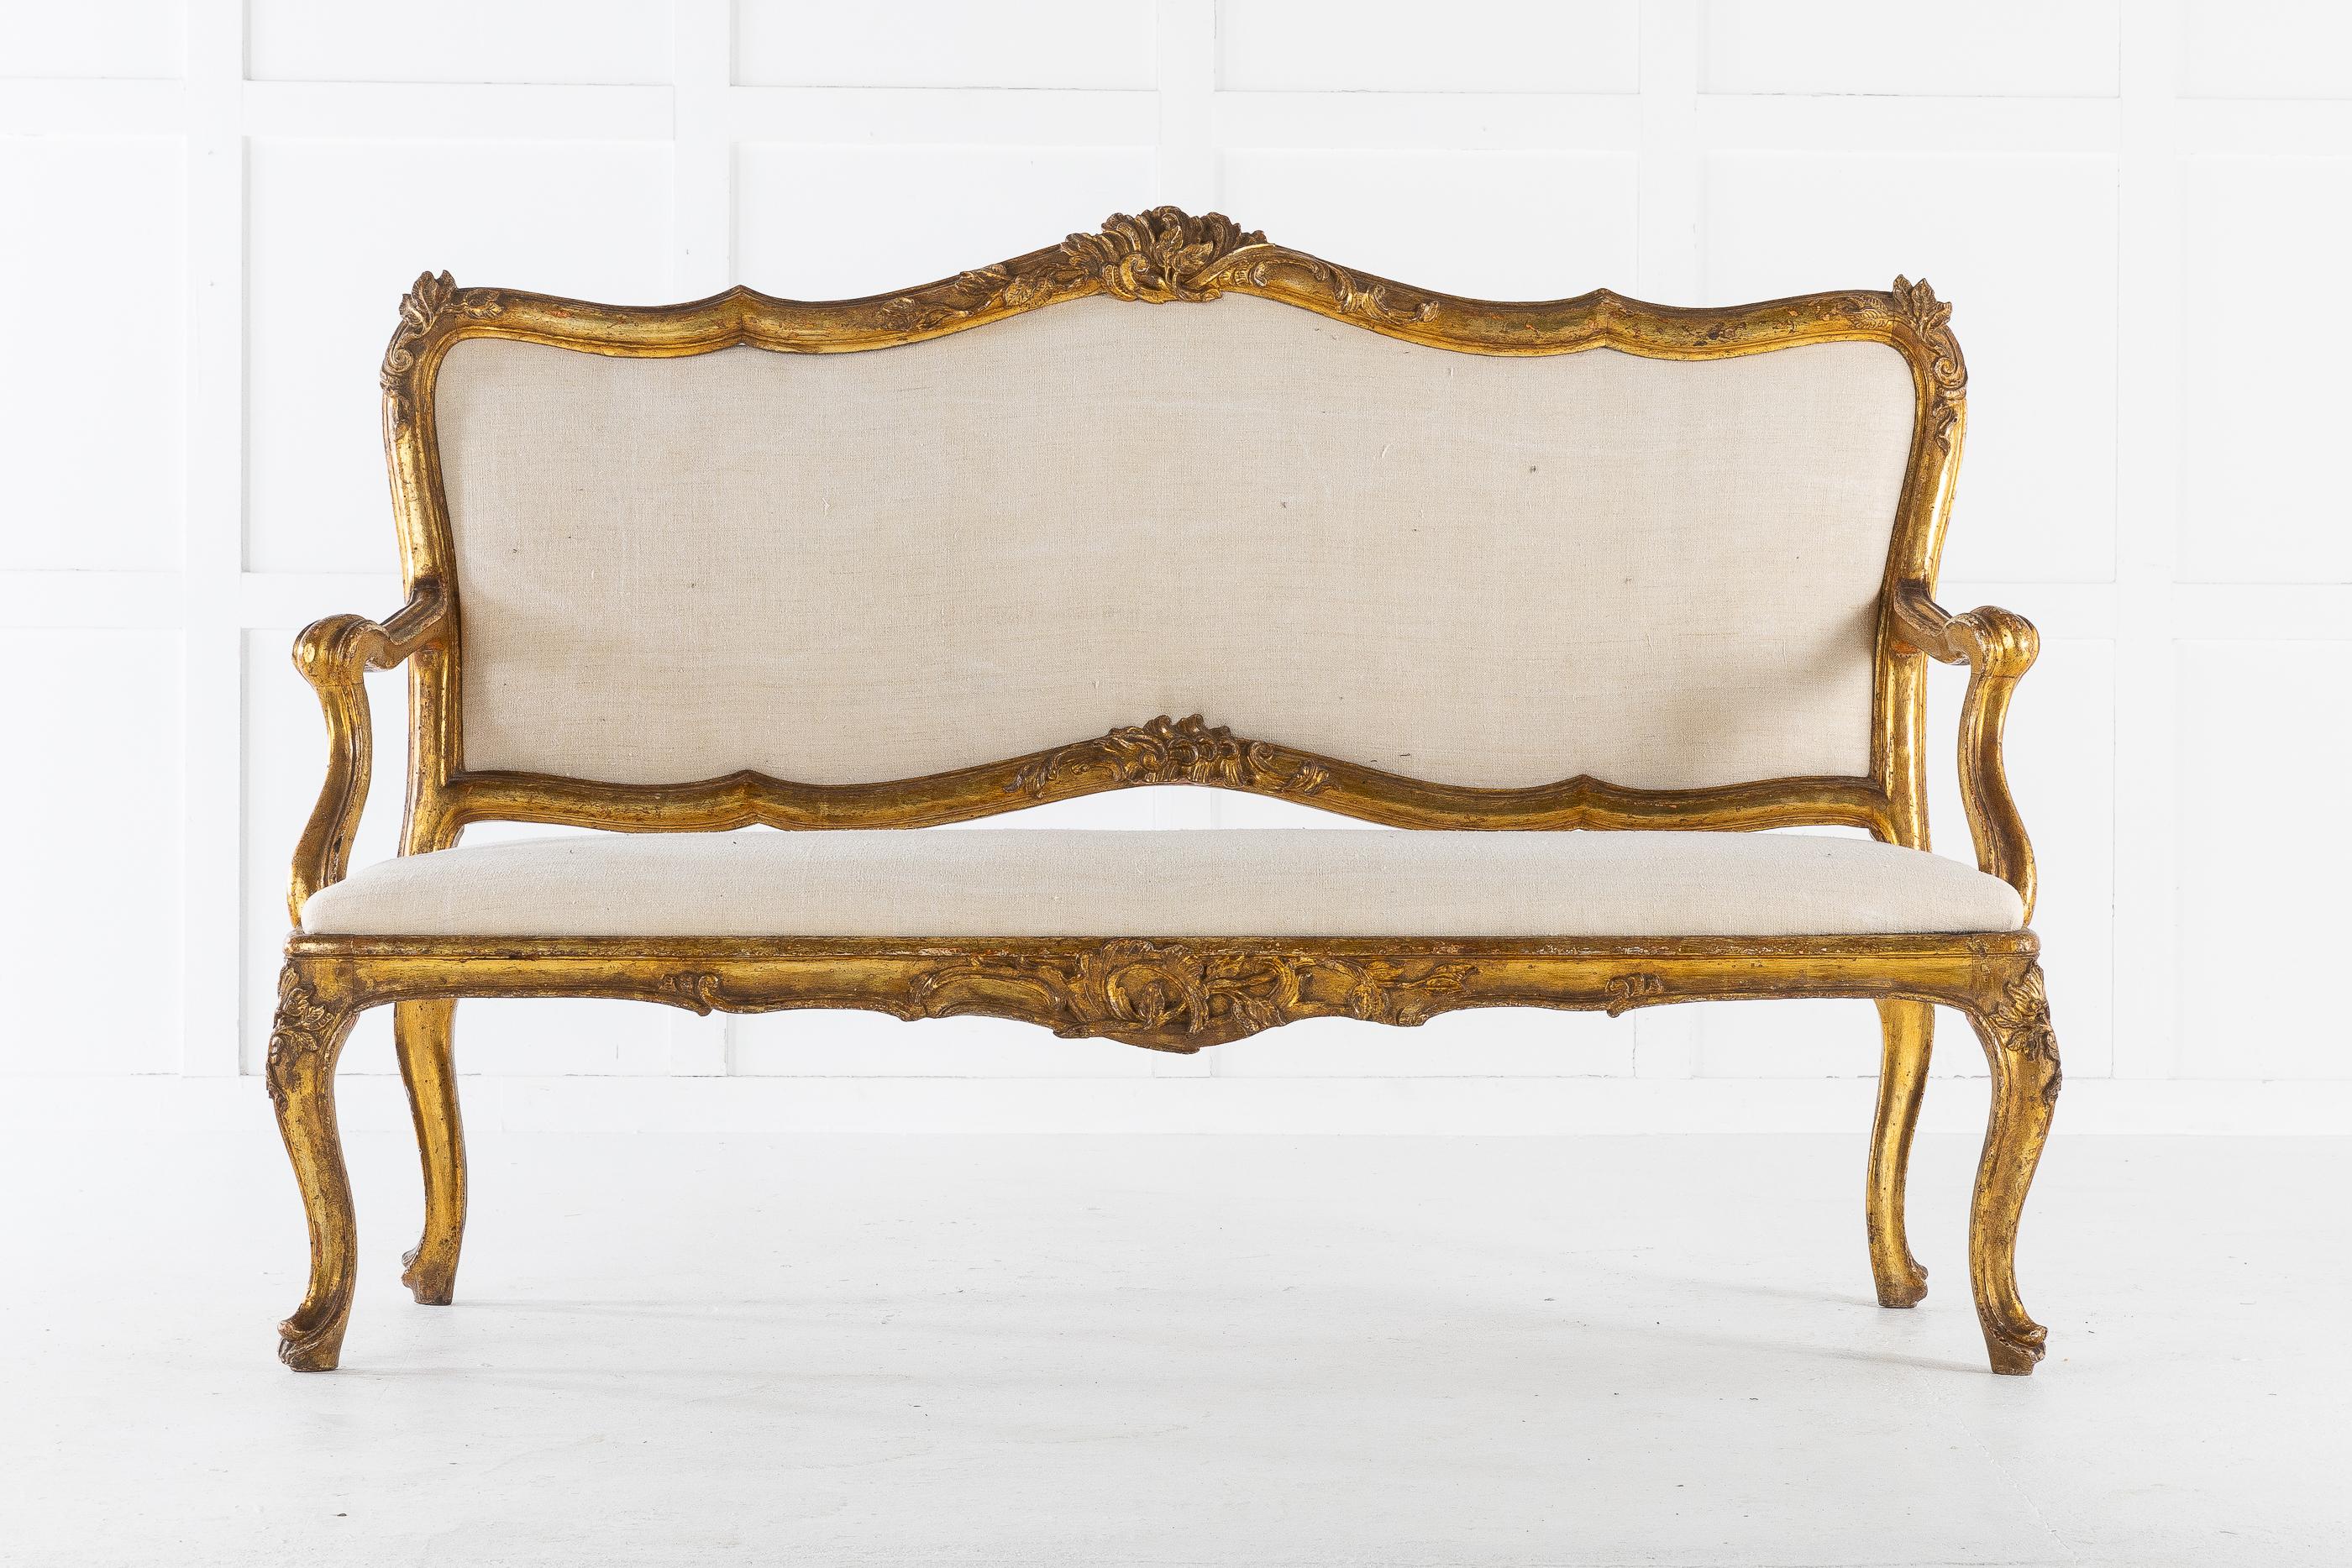 A fine 18th century Italian sofa with nice original aged gilding. Having a shaped back decorated with foliage and carved crest, scrolling armrests on a padded seat supported by cabriole legs.

Upholstery by us in our workshops.
Measures: Seat